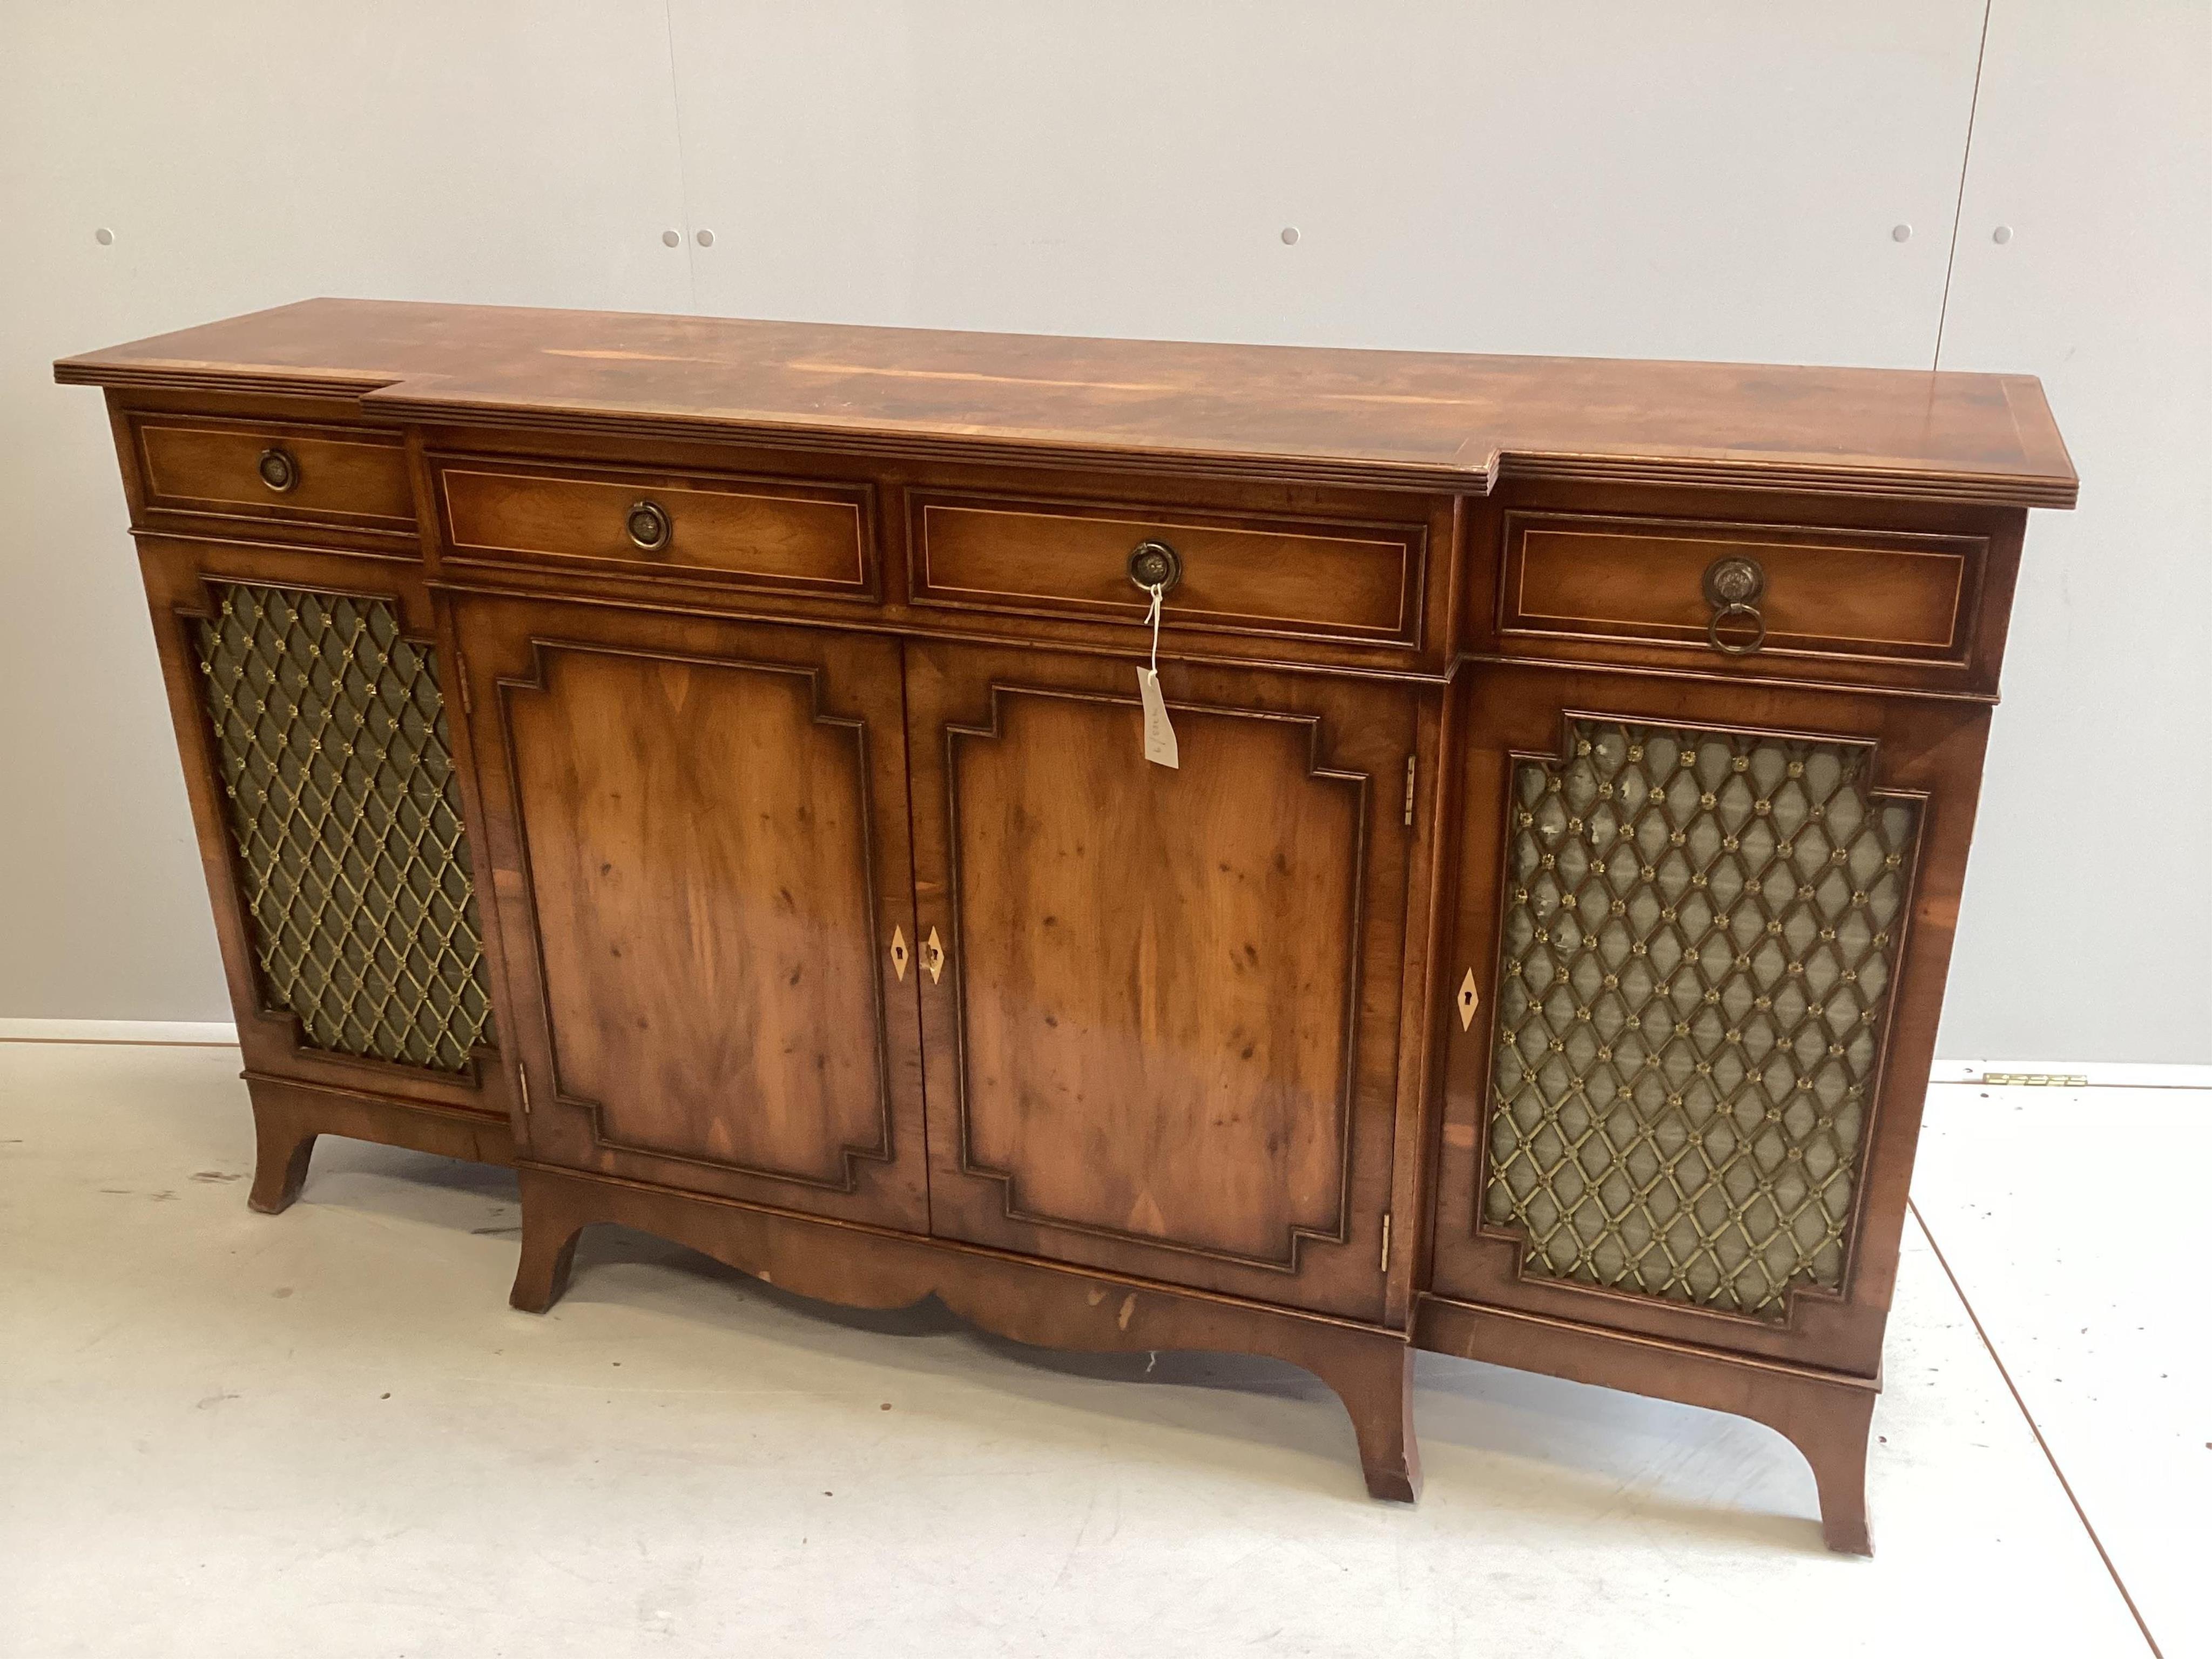 A reproduction yew breakfront side cabinet, width 153cm, depth 38cm, height 84cm. Condition - fair